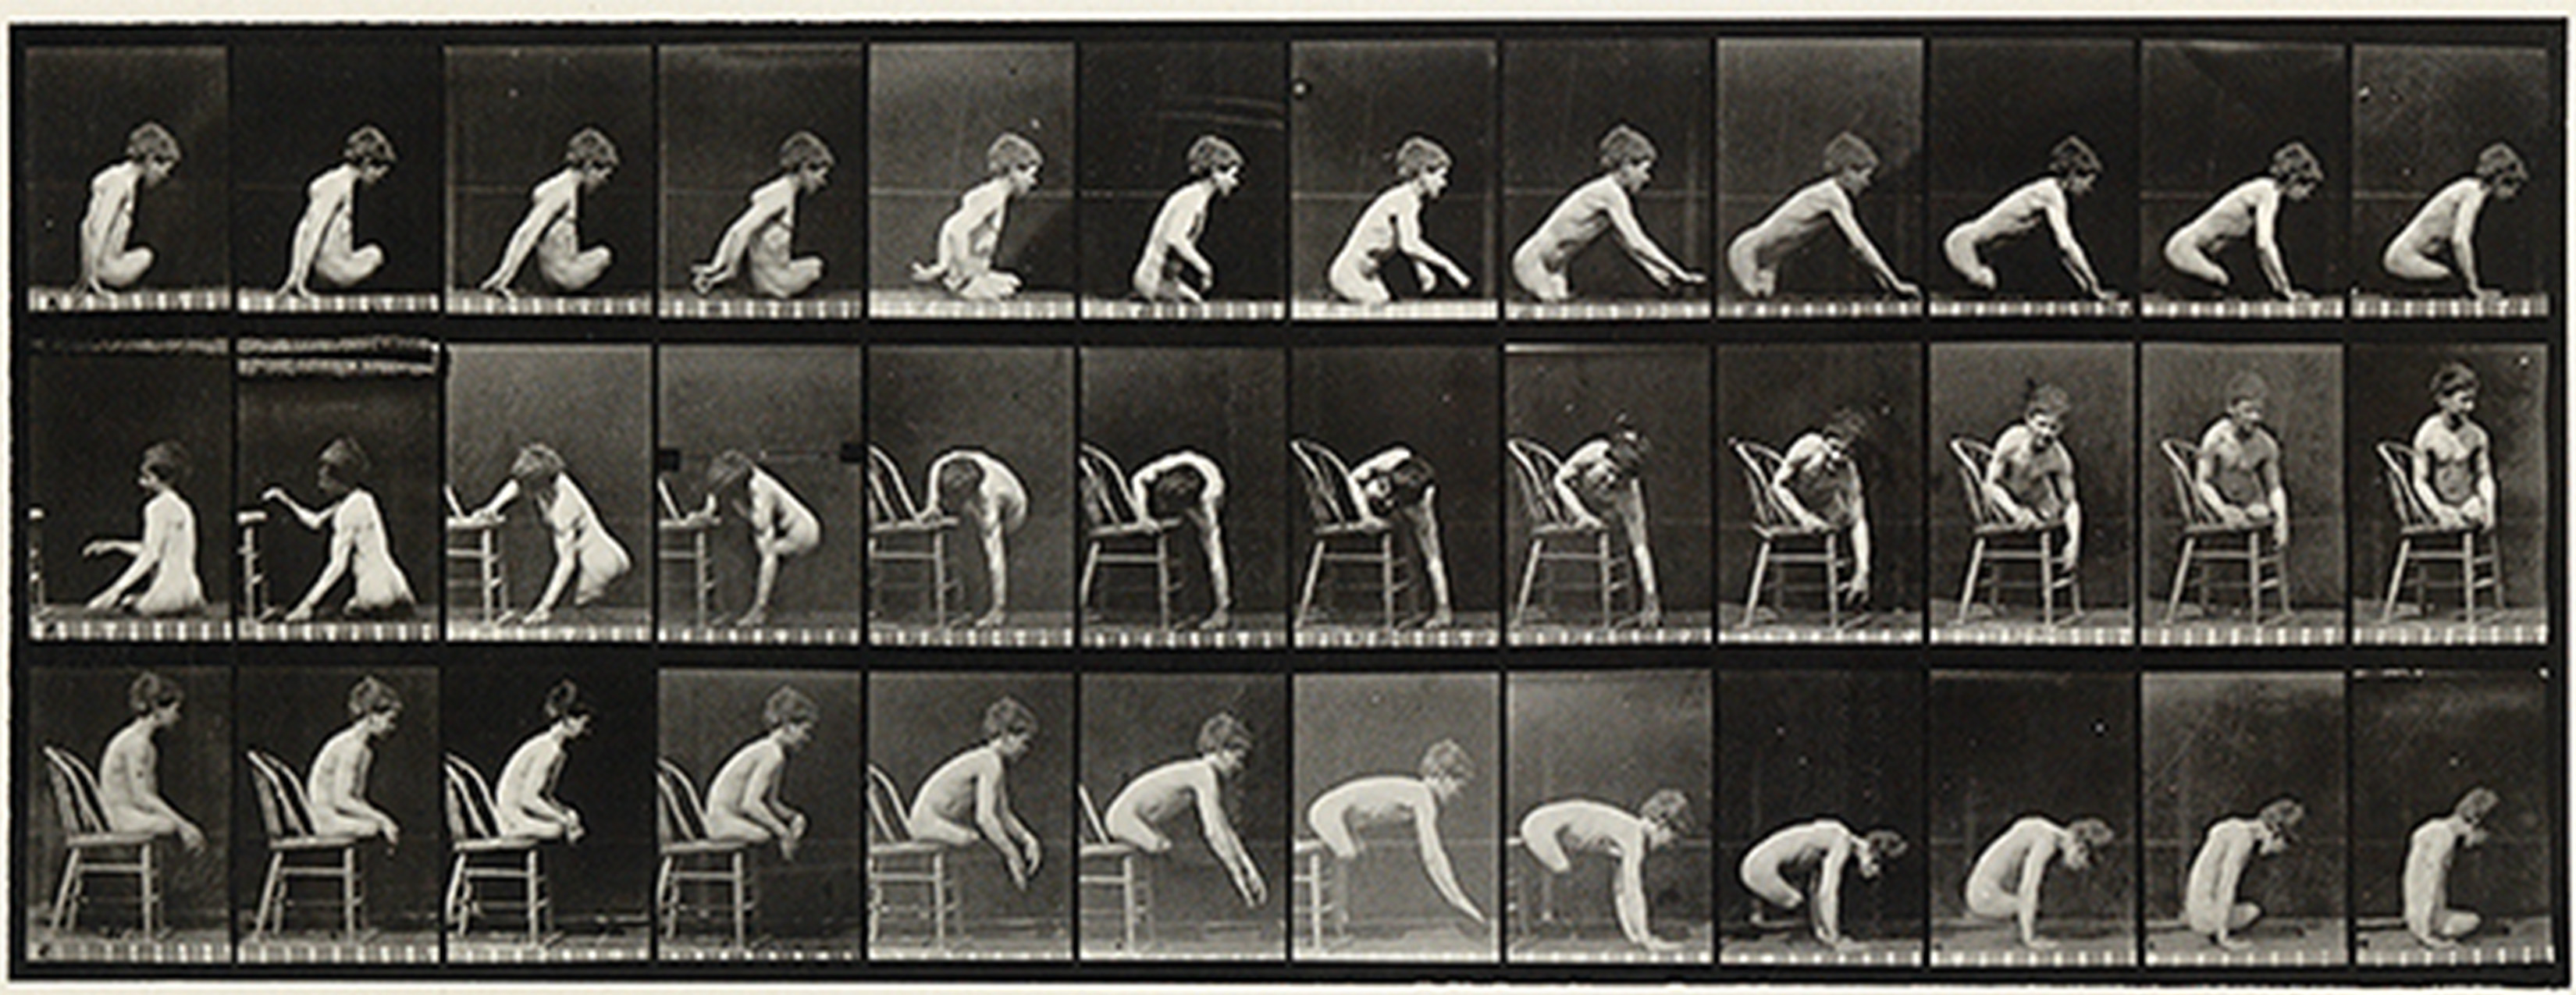 three rows of images of a small child doing various gymnastic poses on a chair